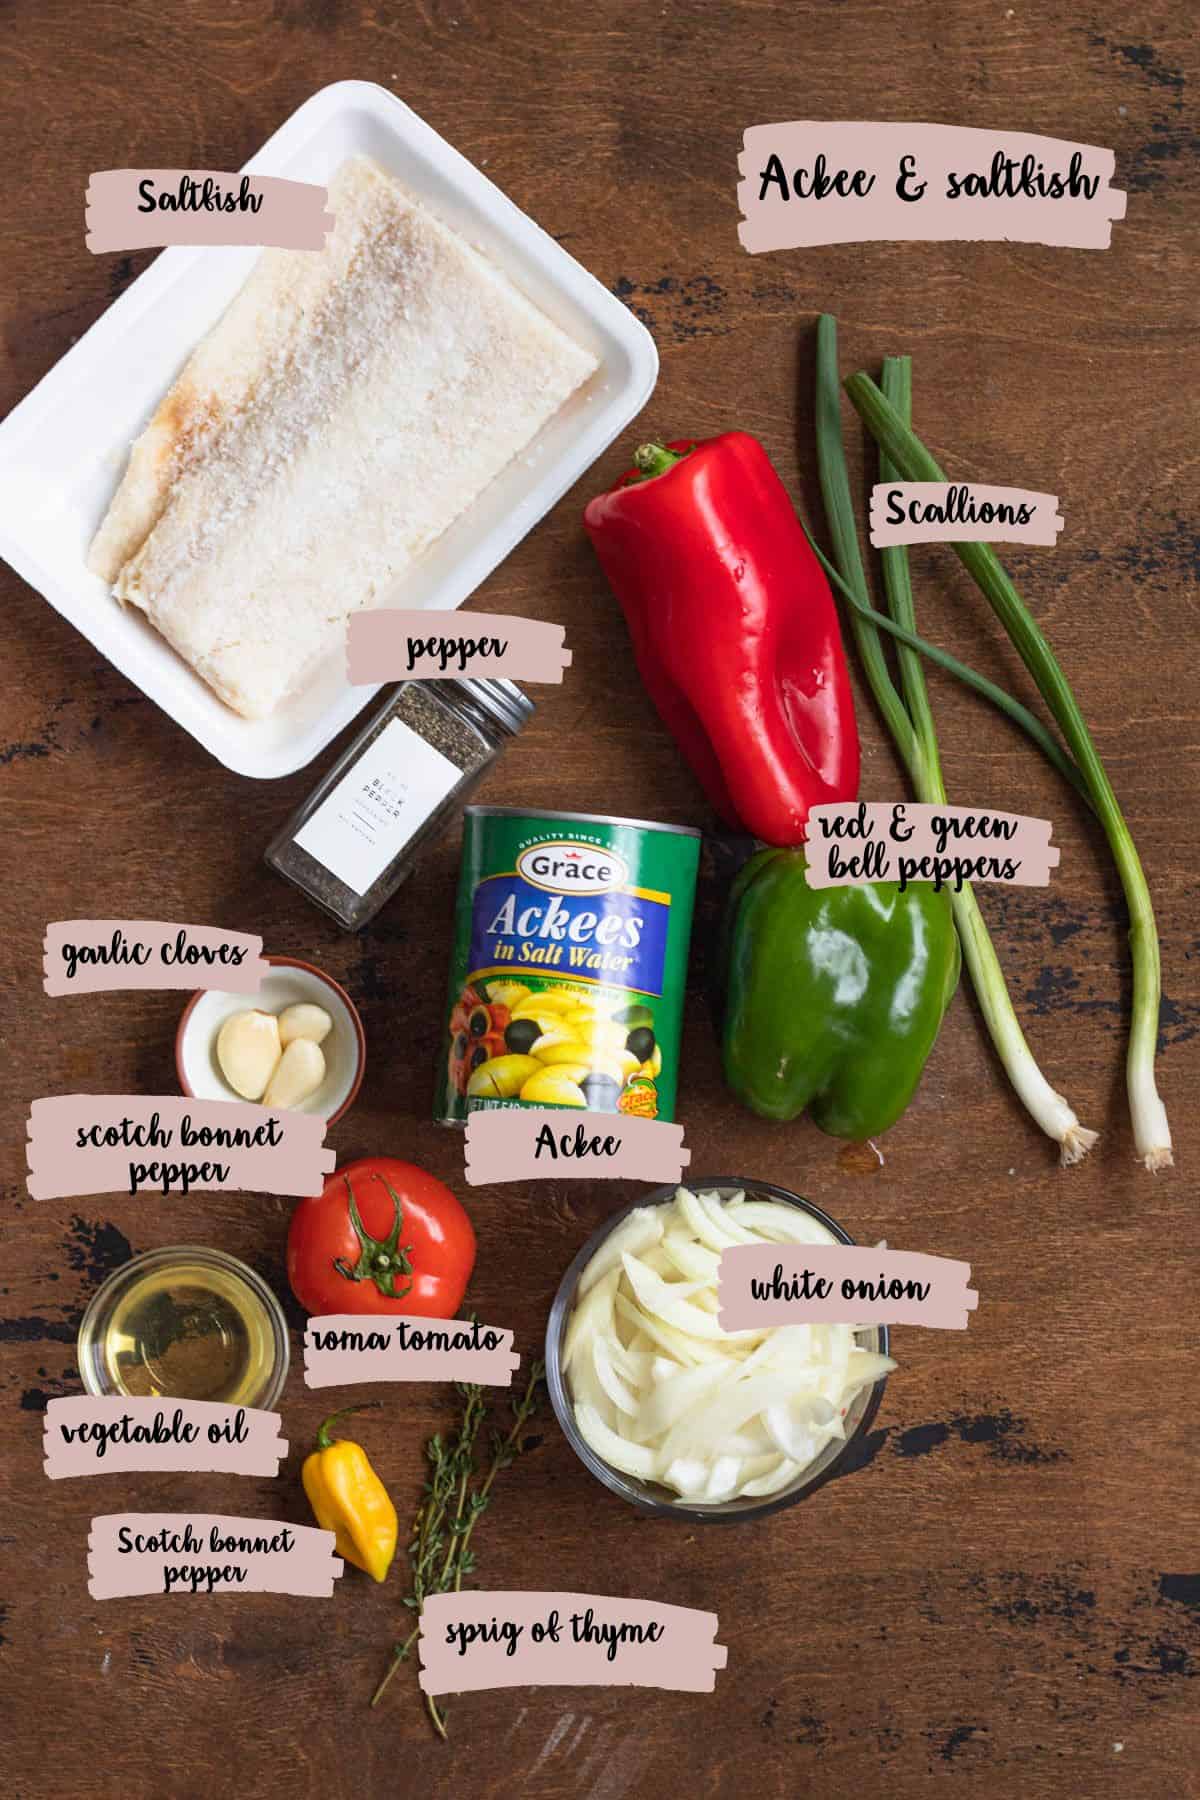 Ingredients shown that are used to make ackee and saltfish. 